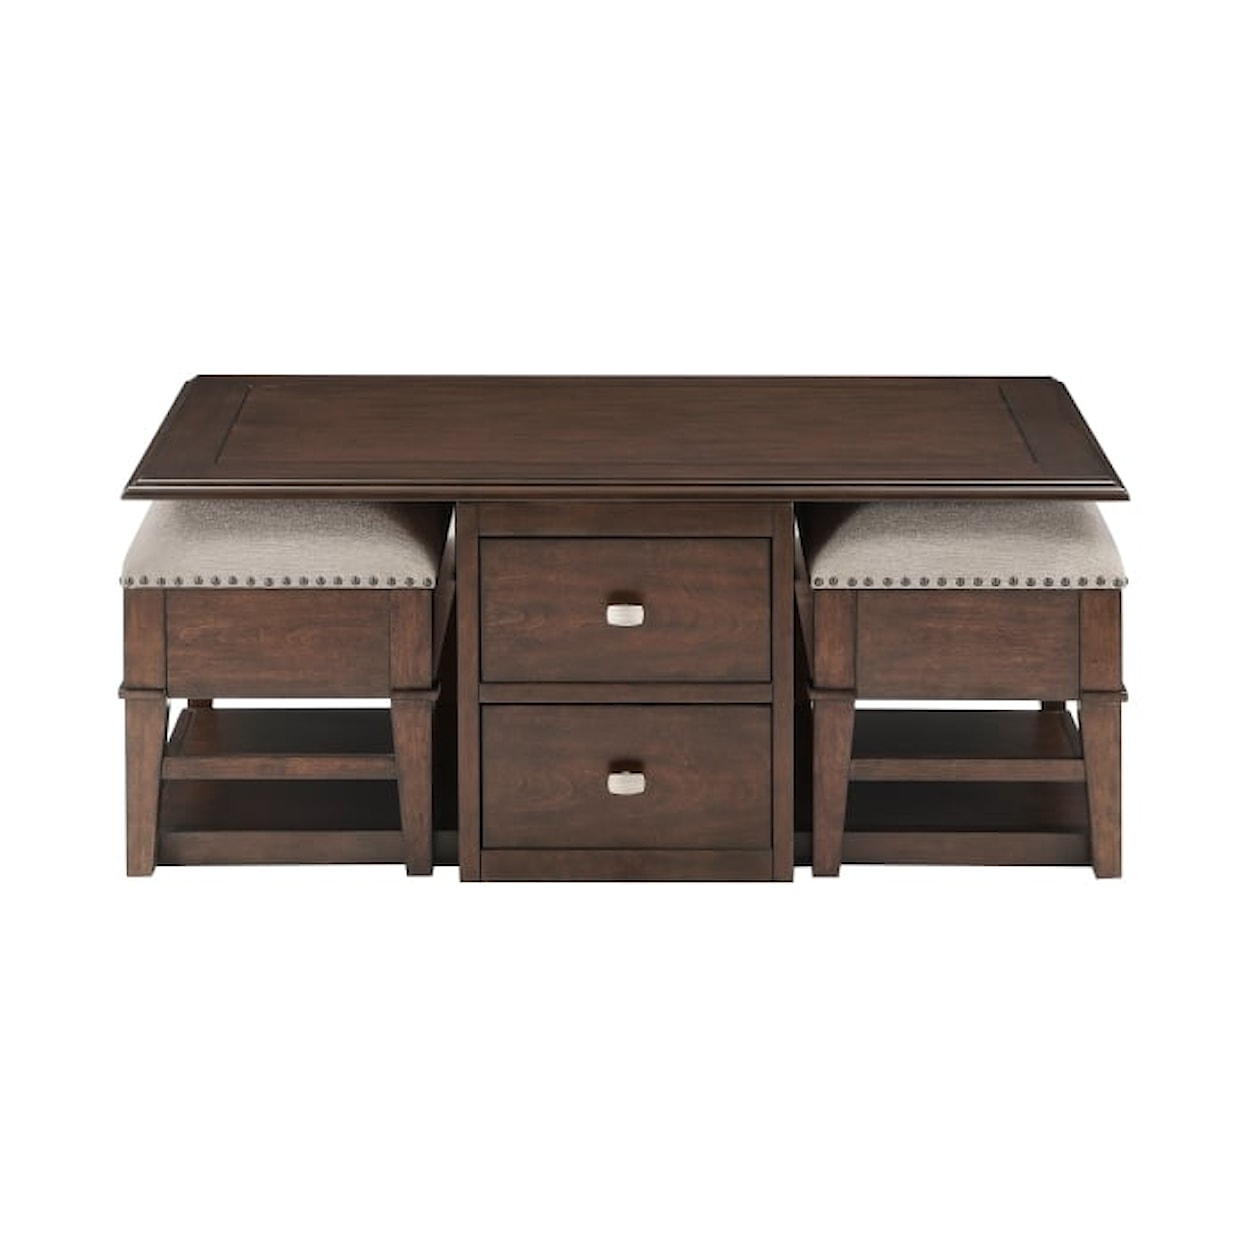 Homelegance Furniture Claremore Cocktail Table with Two Benches